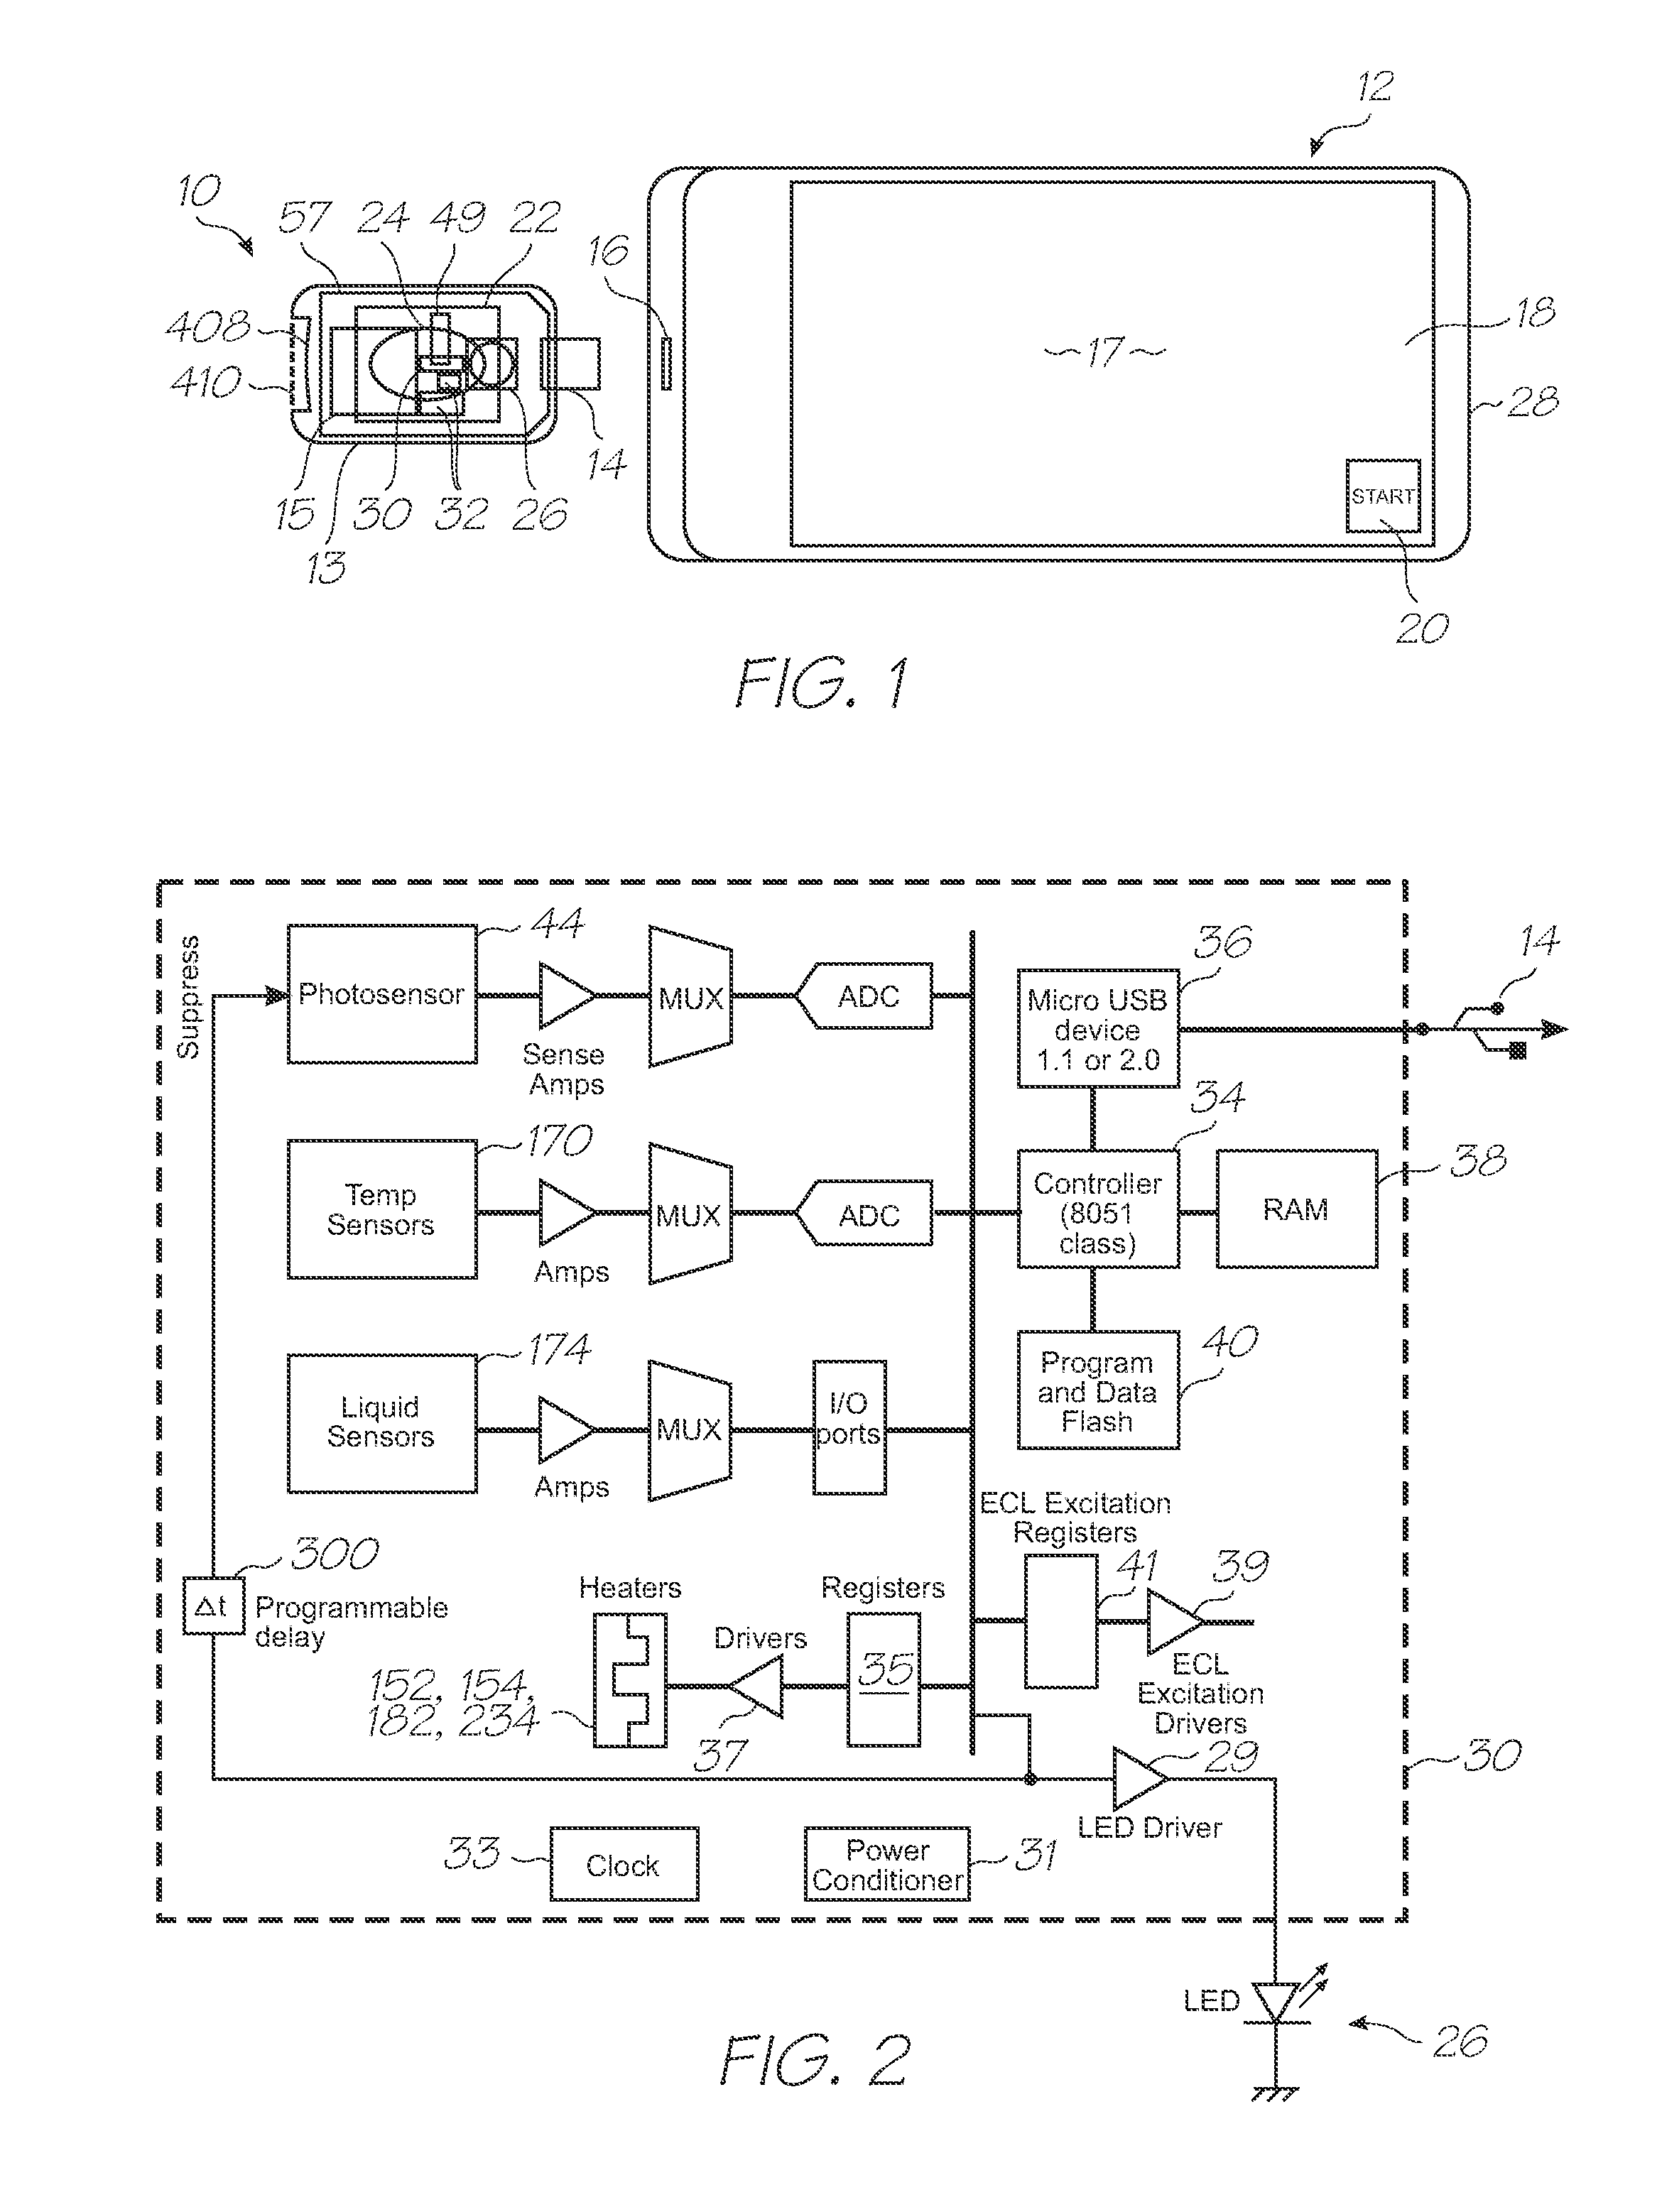 Microfluidic device for chemically and thermally lysing cells